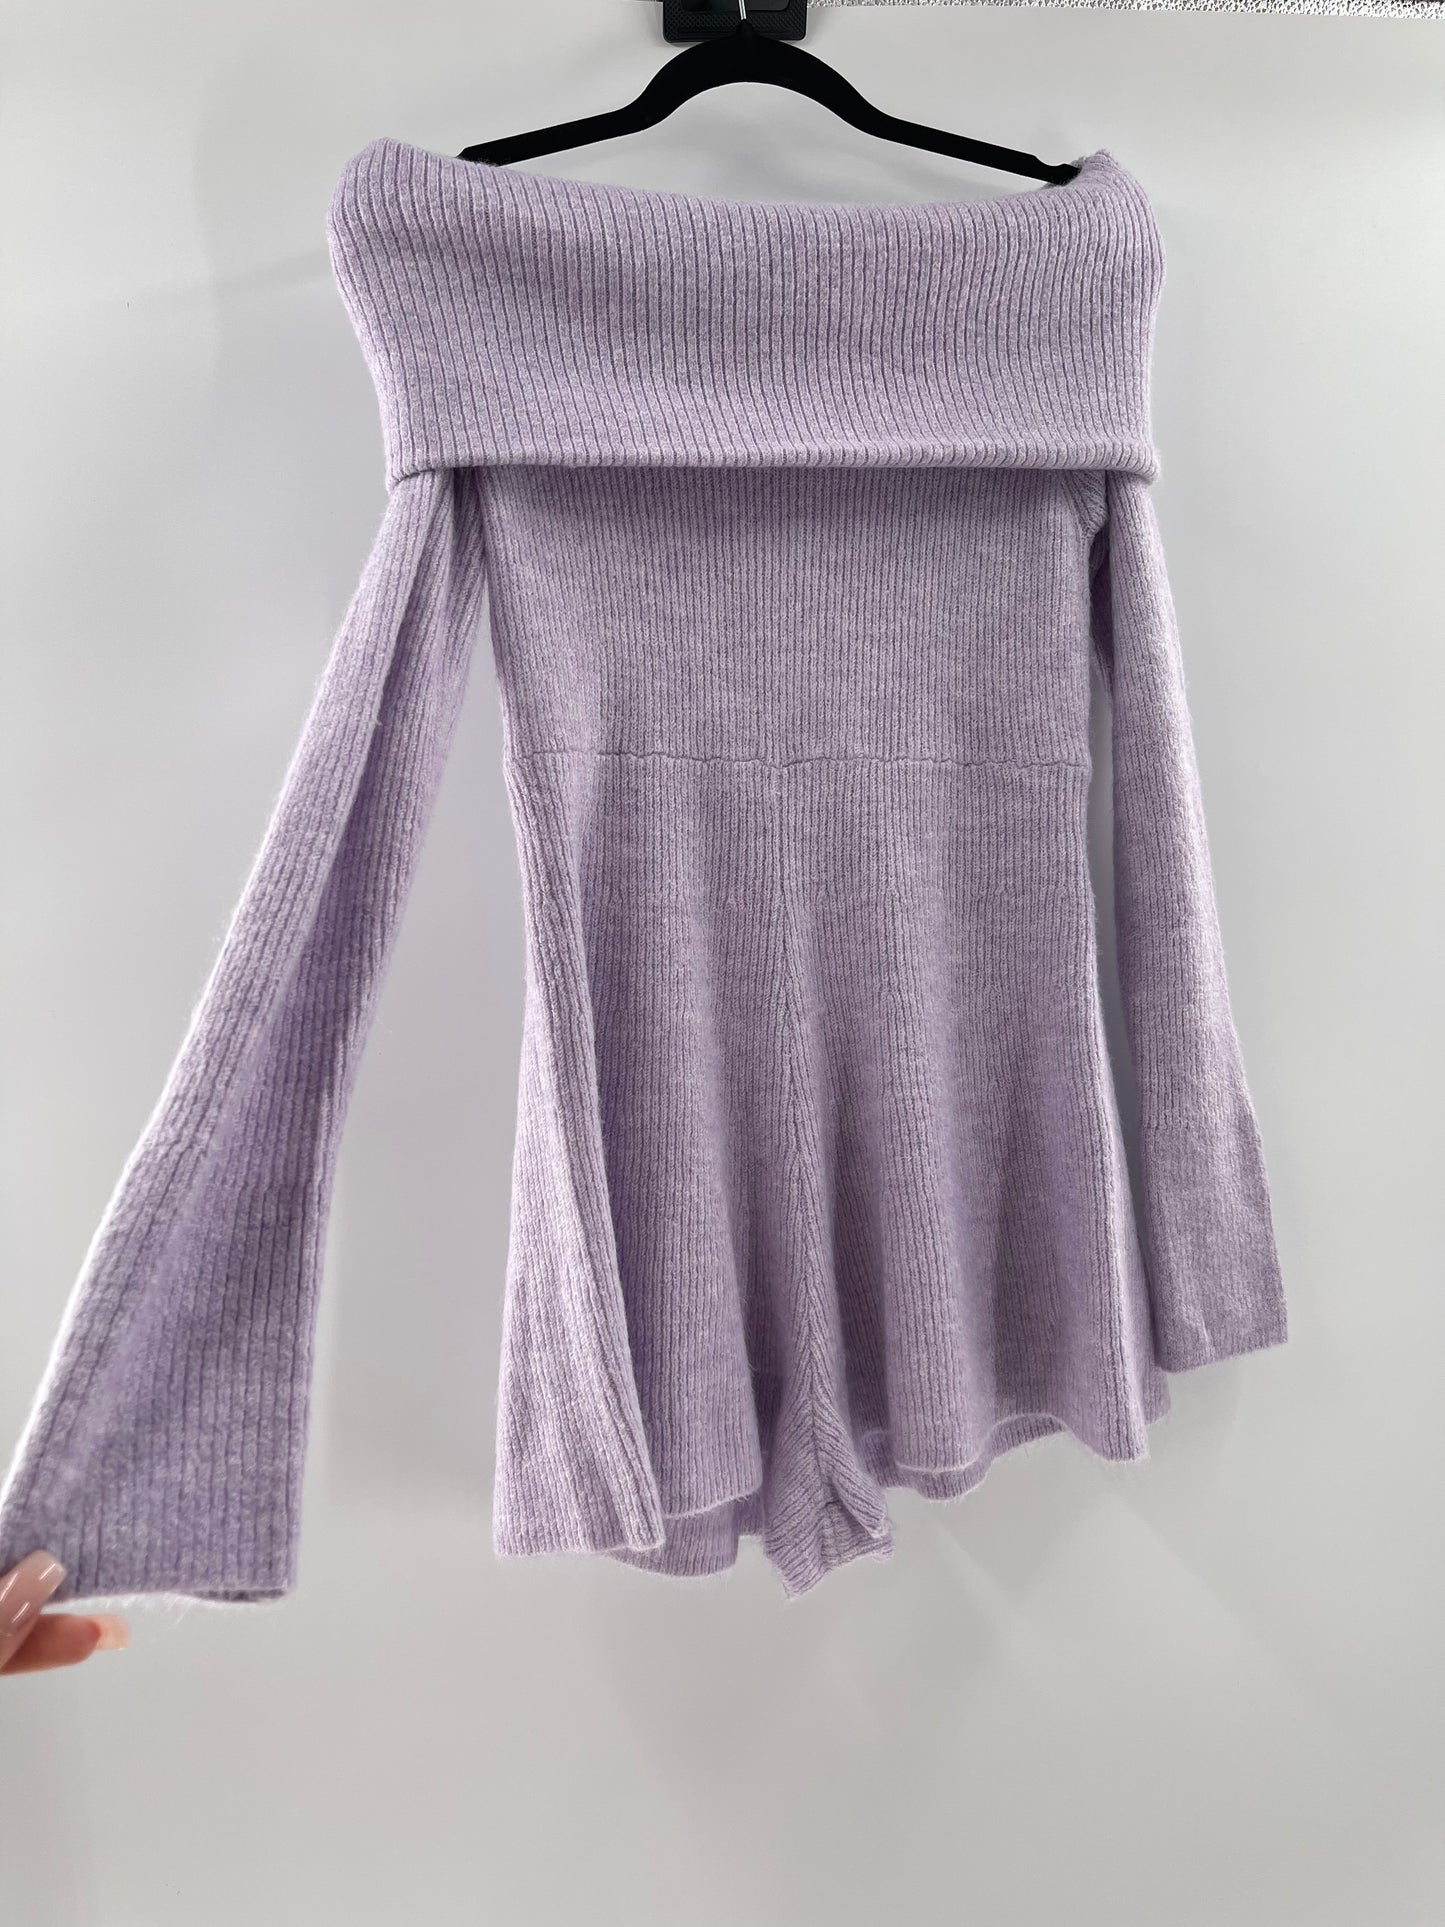 Urban Outfitters Lavendar Knit Playsuit (Large)